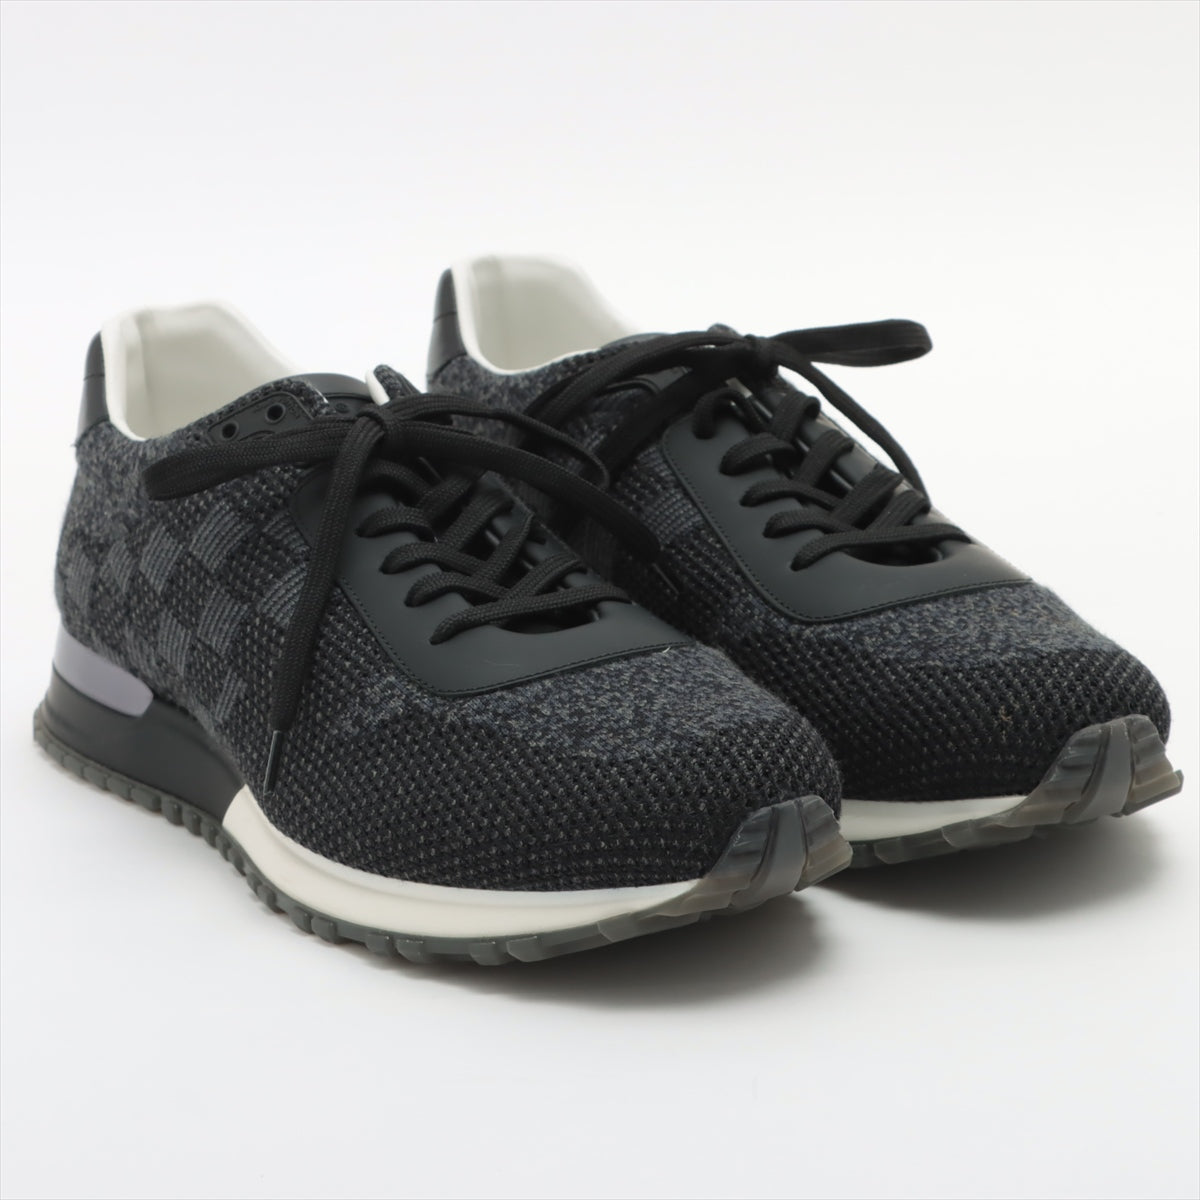 Louis Vuitton Runaway line 18 years Knit × Leather Sneakers GO0148 Men's Black GO0148